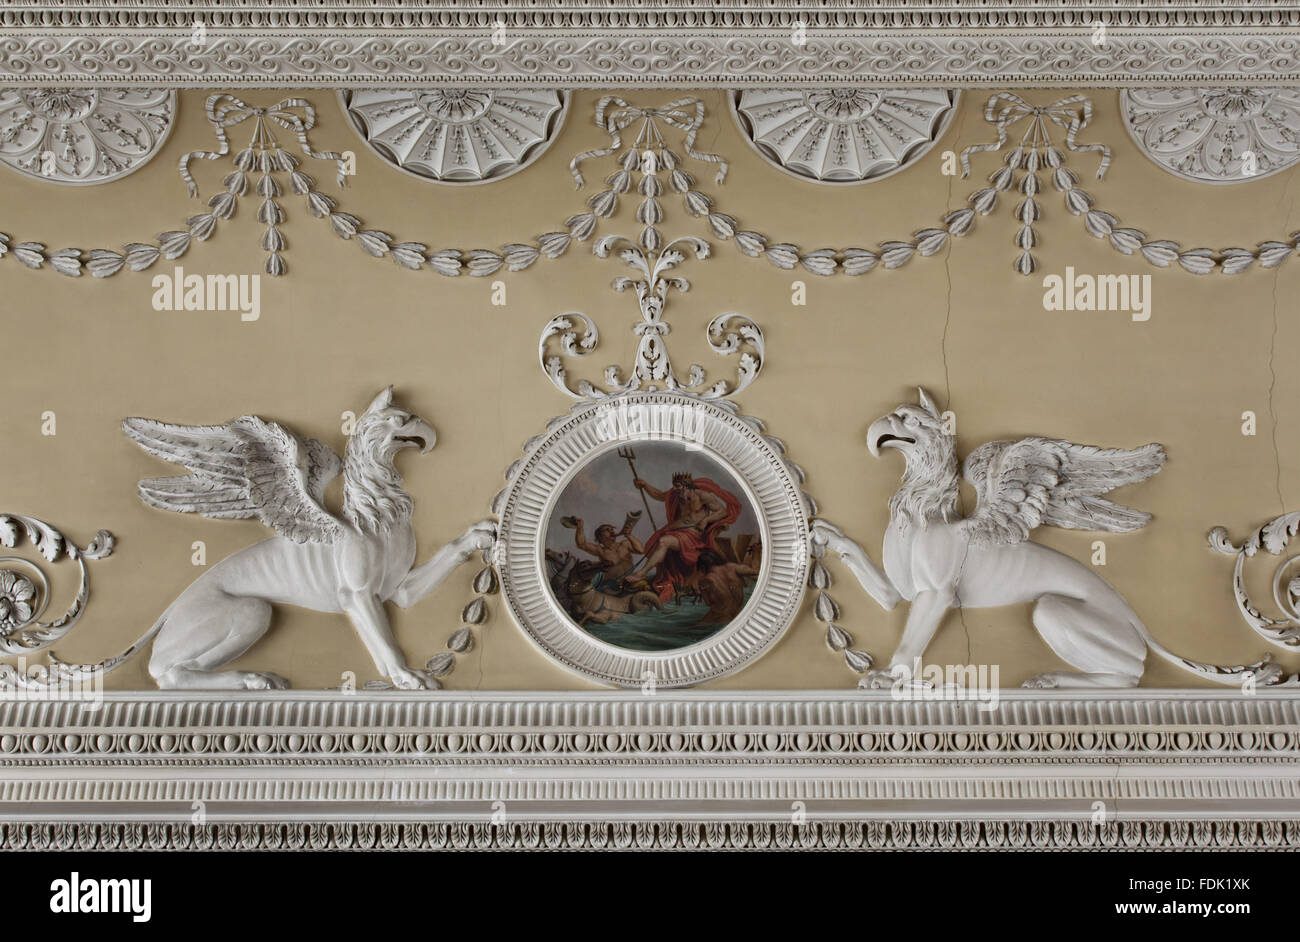 Part of the plasterwork ceiling in the Saloon at Saltram, Devon. Robert Adam designed the ceiling and the plasterwork is attributed to Joseph Rose. Stock Photo